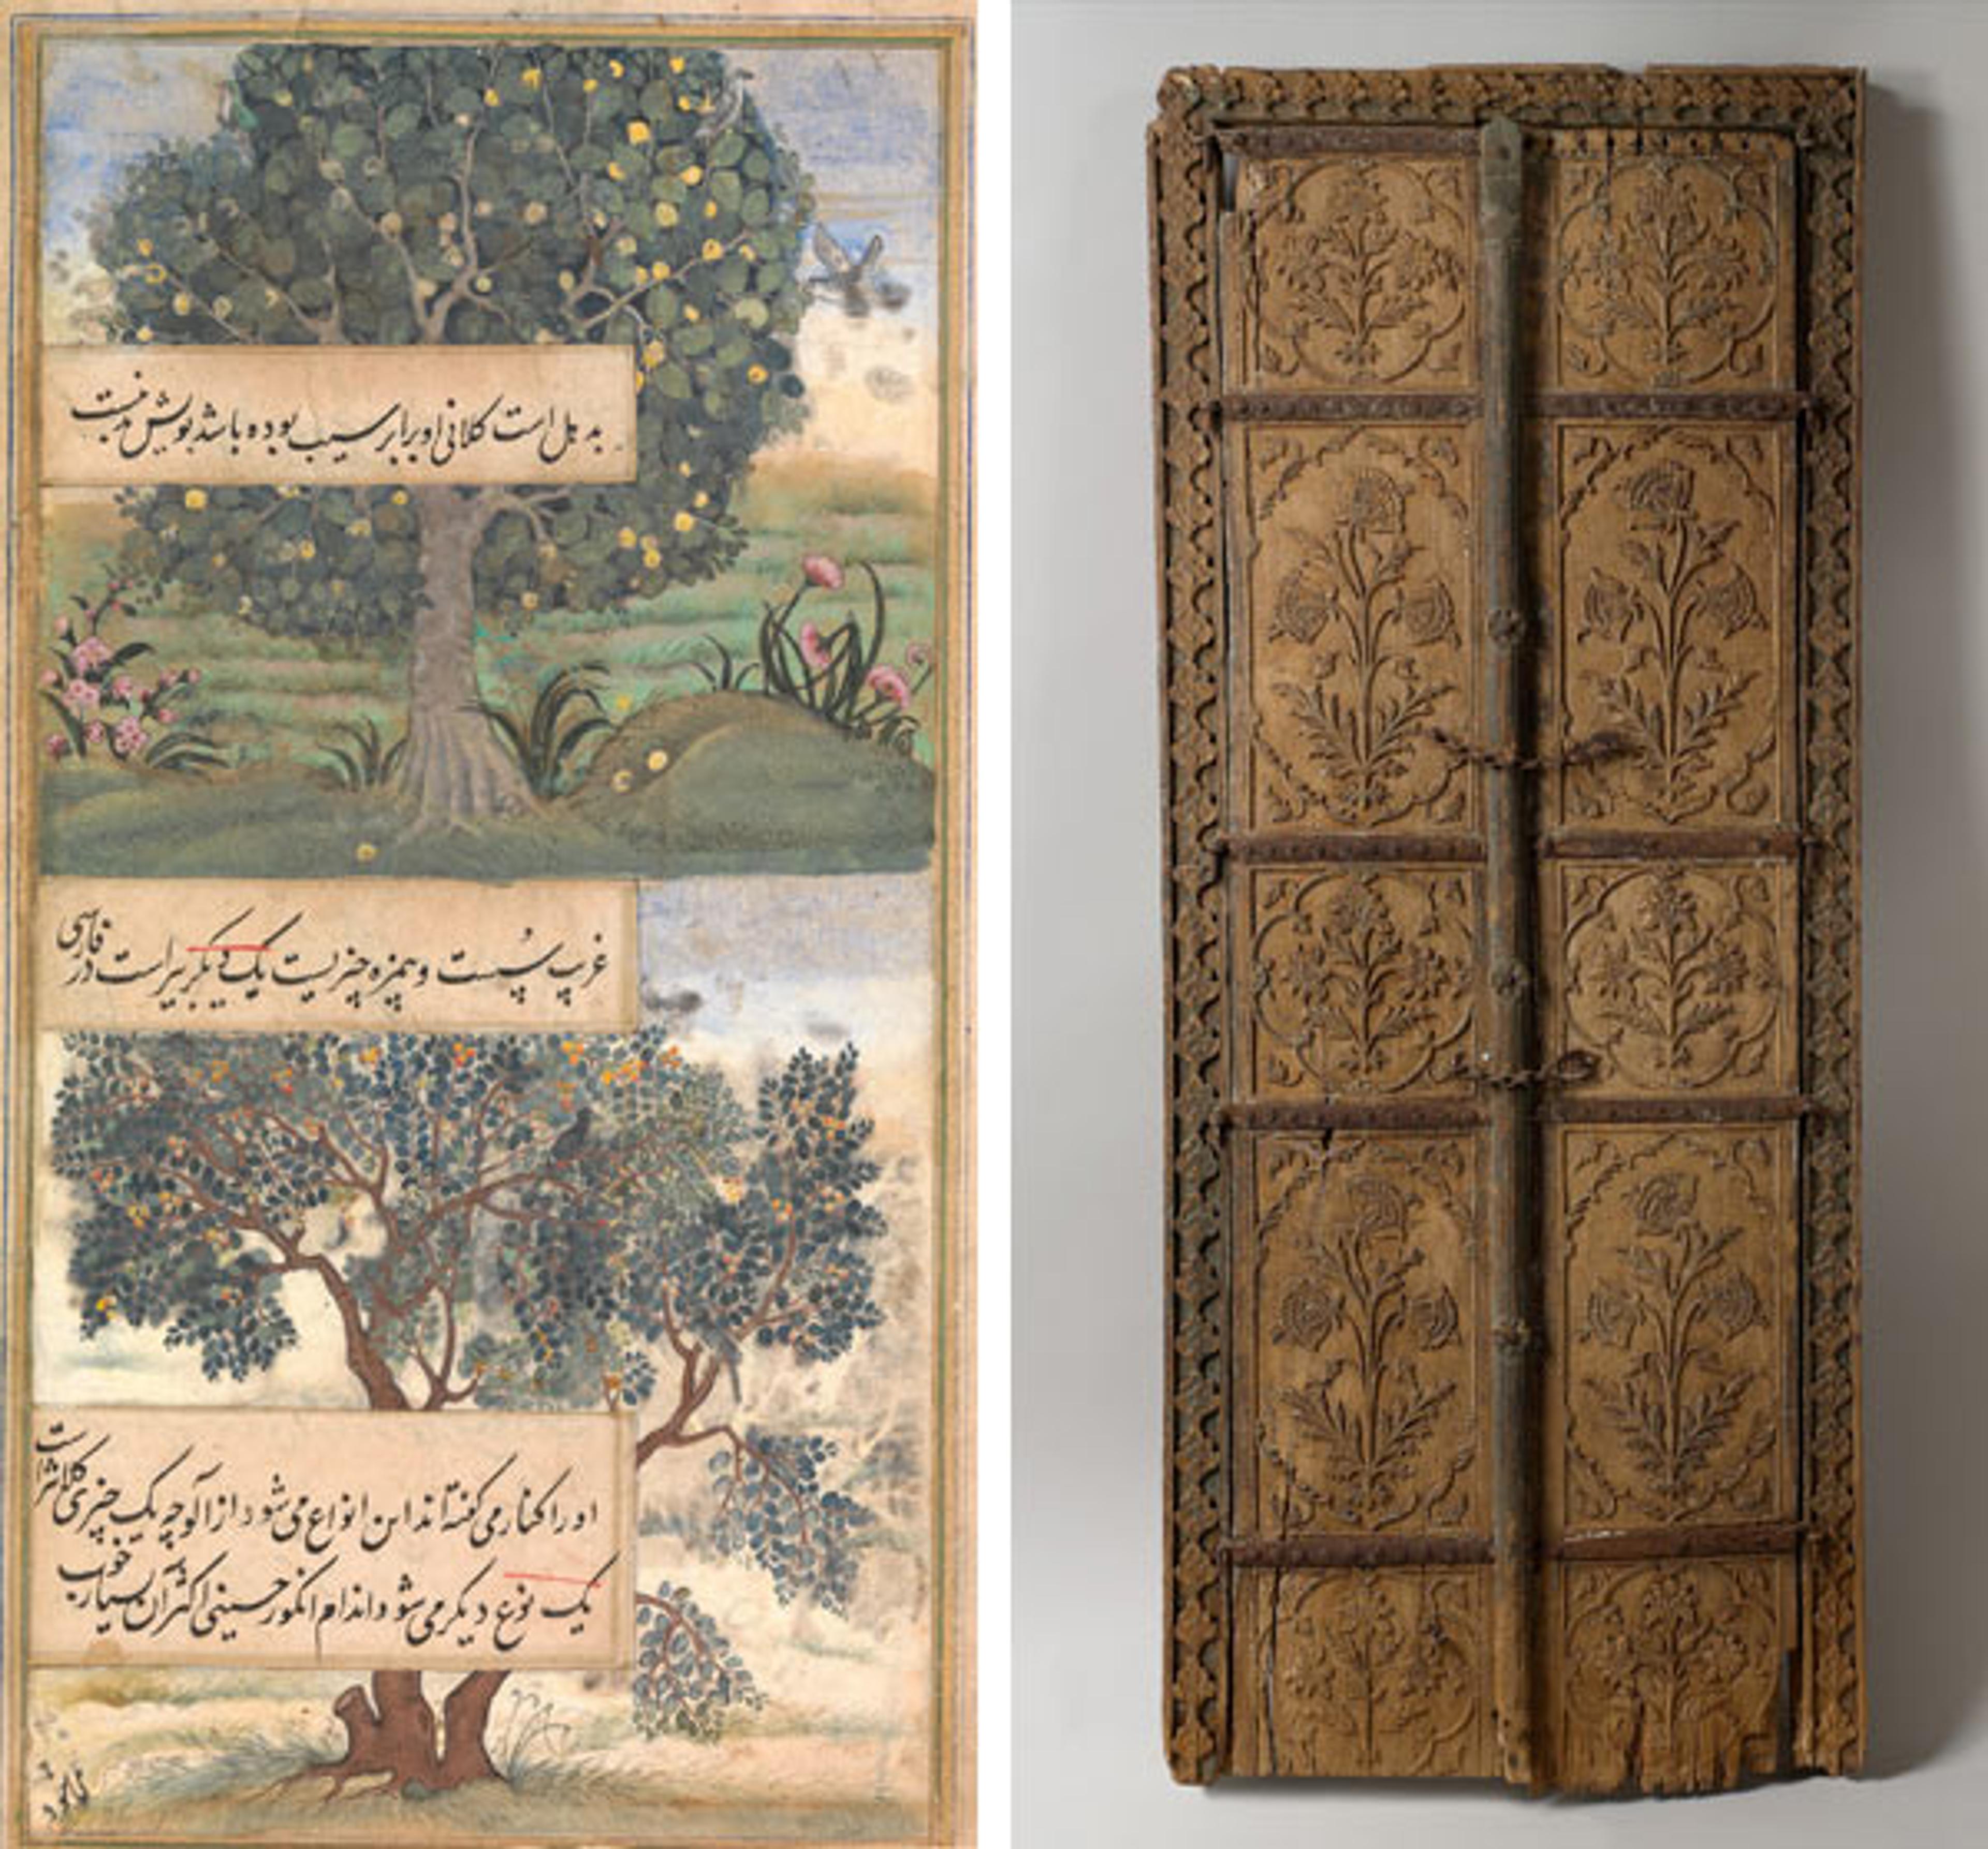 Left: "Three Trees of India," folio from a Baburnama (Autobiography of Babur), late 16th century. India. Islamic. Ink, opaque watercolor, and gold on paper; H. 9 13/16 in.(25 cm) W. 5 1/8 in. (13 cm). The Metropolitan Museum of Art, New York, Purchase, Louis E. and Theresa S. Seley Purchase Fund for Islamic Art, Anonymous Gift, in honor of Amy Poster, and Friends of Islamic Art Gifts, 2013 (2013.576). Right: Pair of flower-style doors, second half 17th century. Northern India. Islamic. Wood; carved with residues of paint; H. 73 in. (185.4 cm) W. 30 in. (76.2 cm) includes both doors D. 3 in. (7.6 cm) Wt. 63 lbs. (28.6 kg). The Metropolitan Museum of Art, New York, Gift of Harvey and Elizabeth Plotnick, 2009 (2009.376a, b)